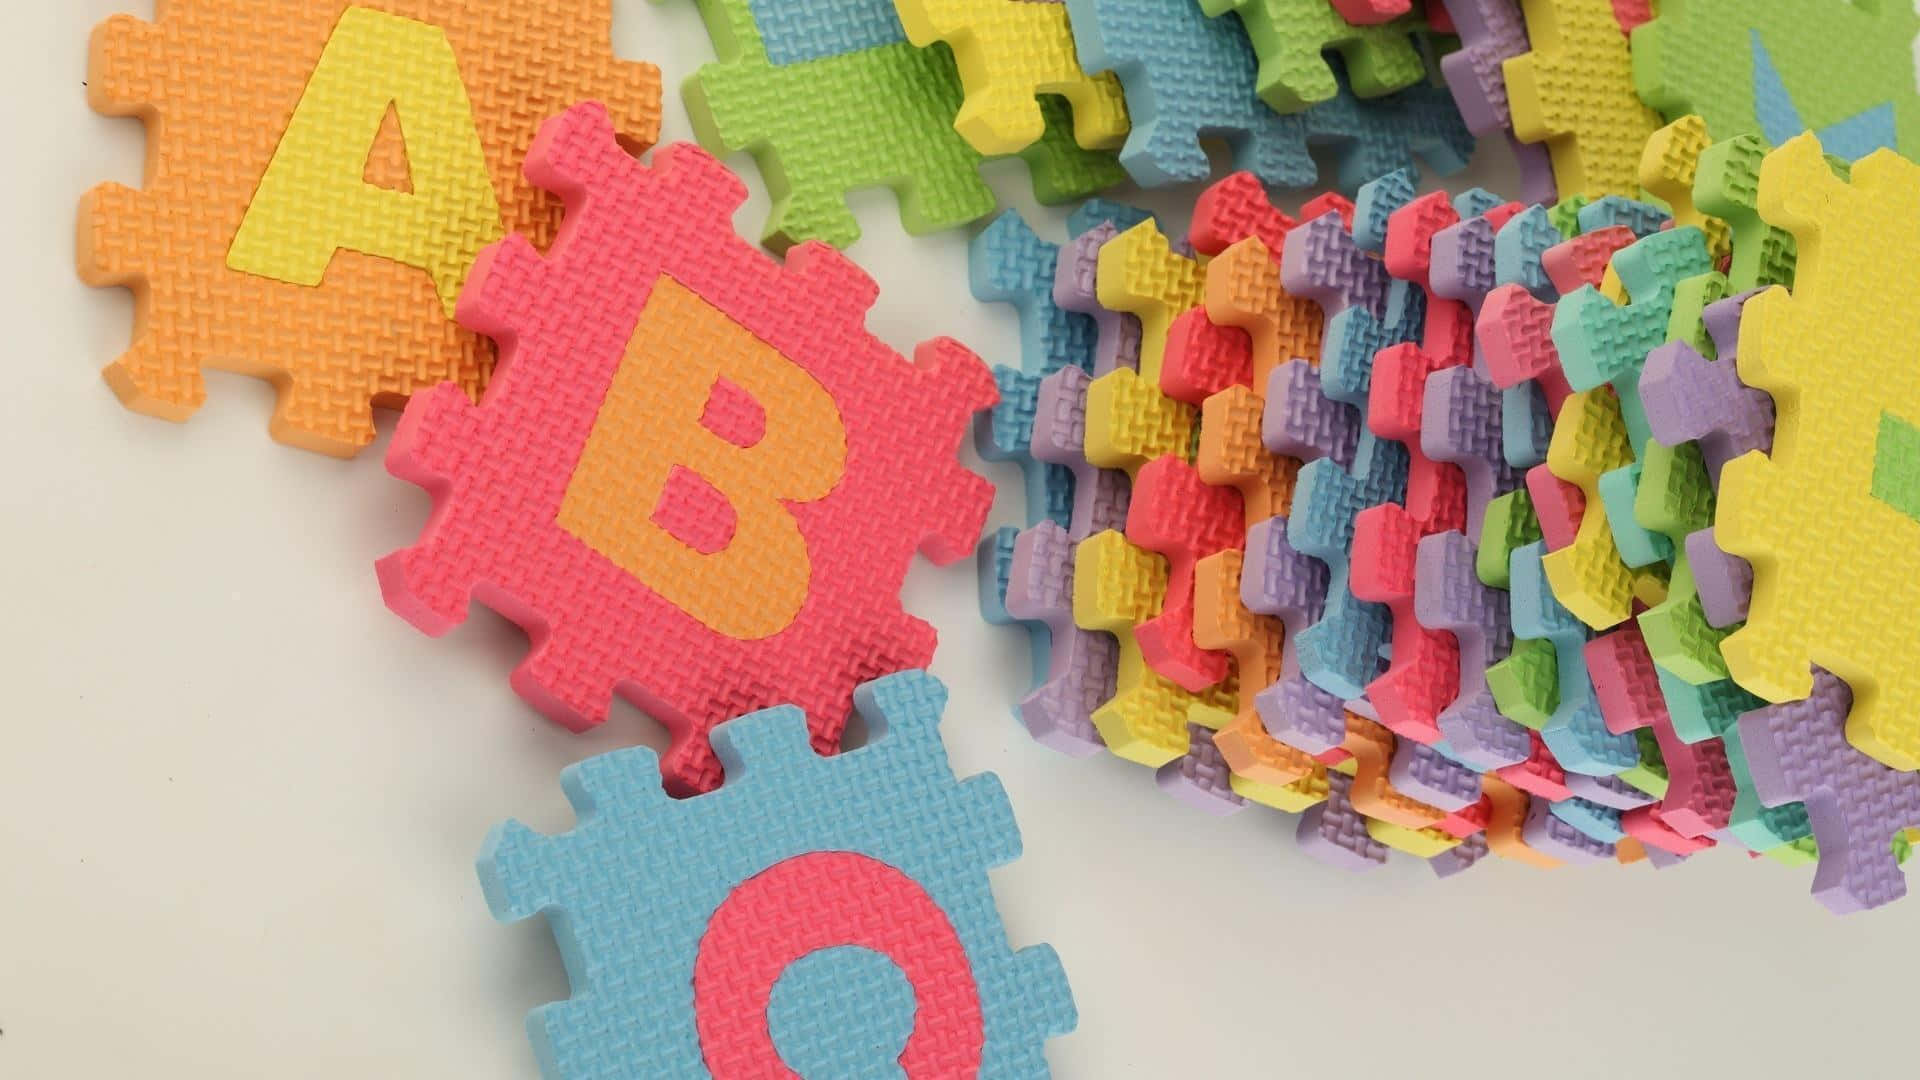 A Colorful Puzzle With Letters And Numbers